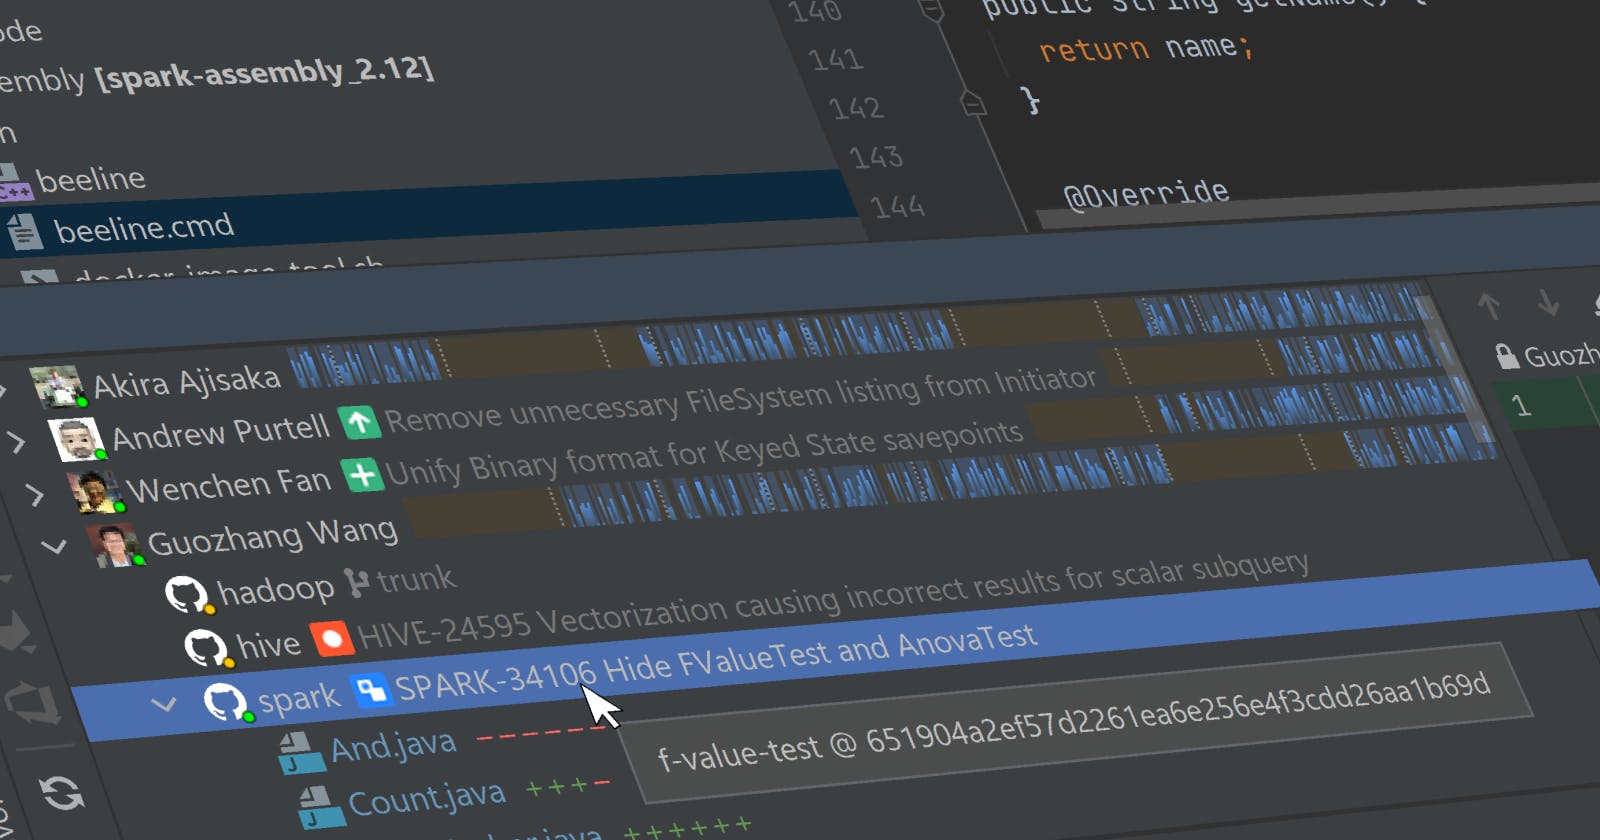 How To See Which Branch Your Teammate Is On In Android Studio